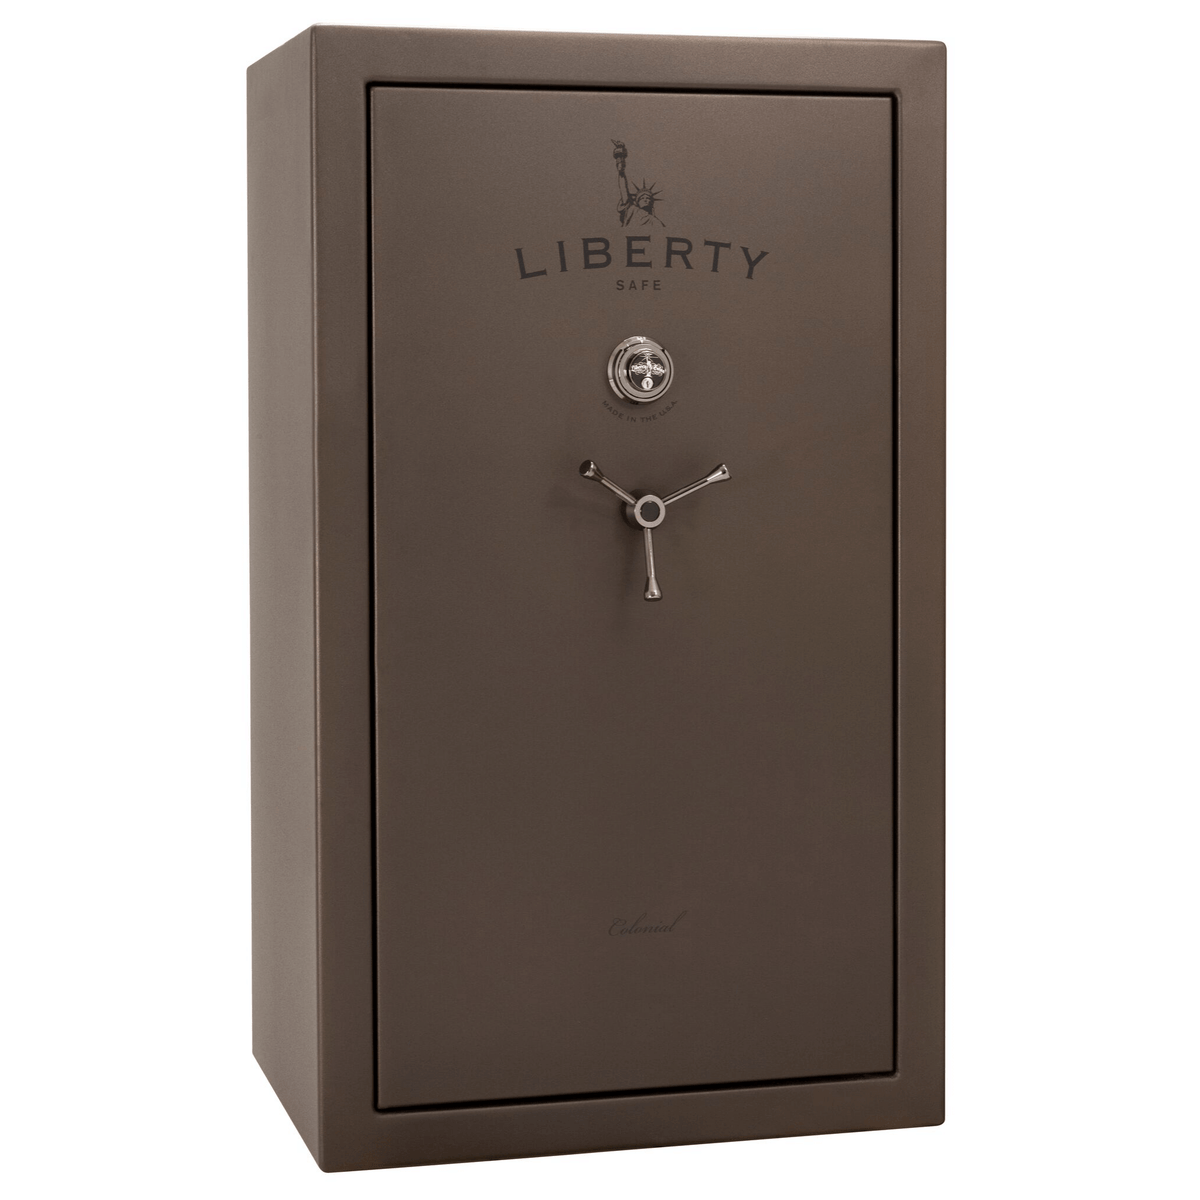 Liberty Colonial 30 Safe in Textured Bronze with Black Chrome Mechanical Lock.